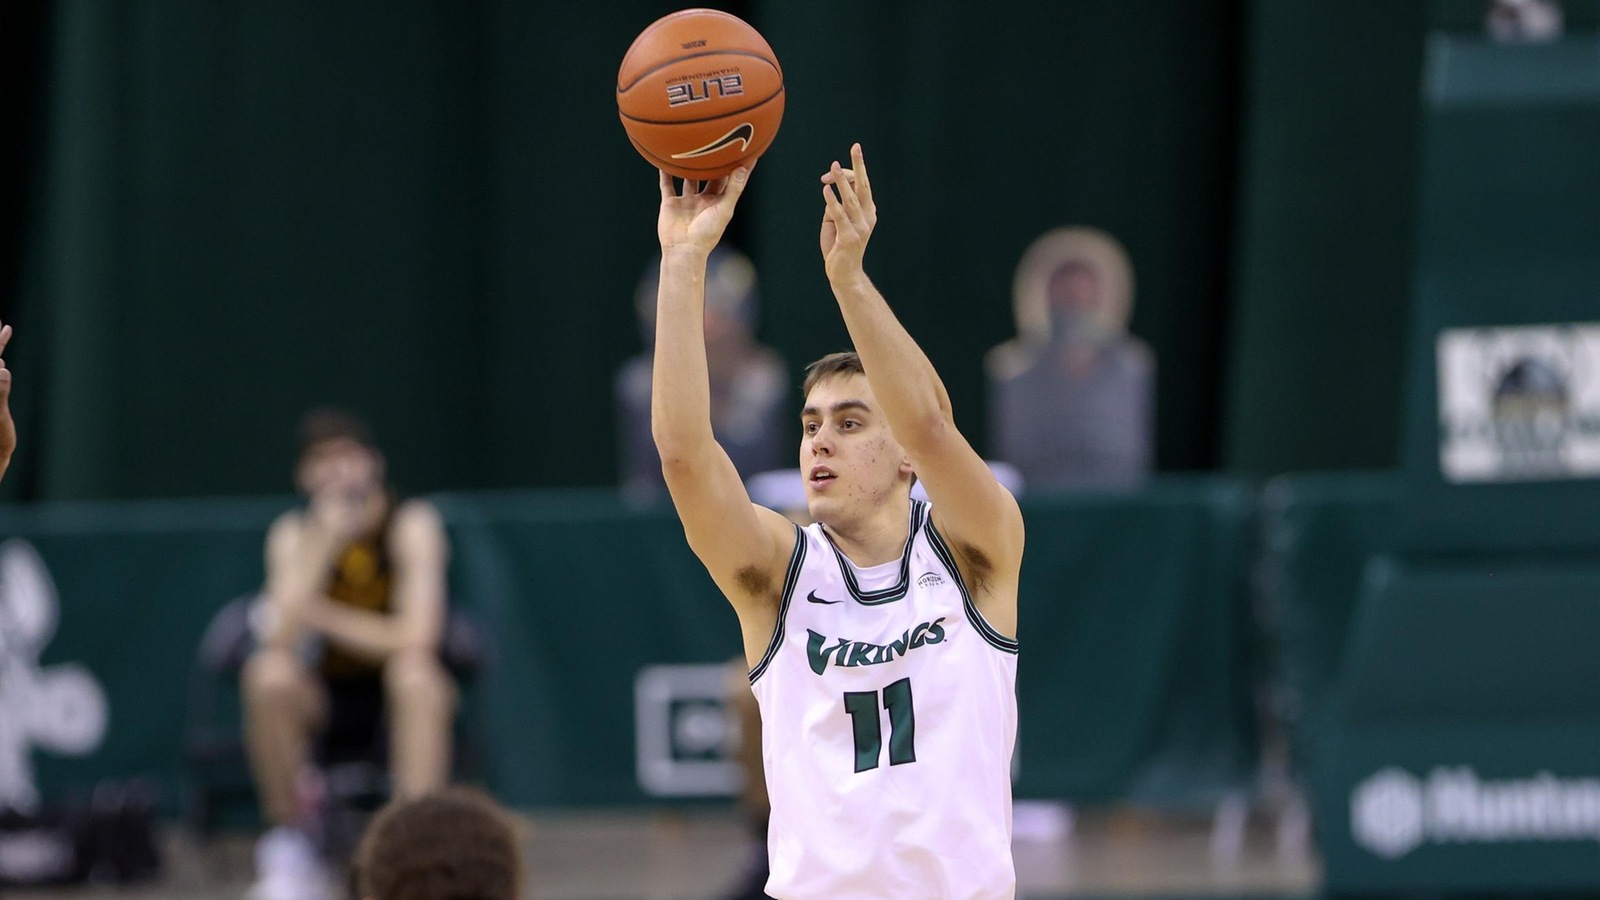 Vikings Secure 11th Horizon League Victory in Win over Green Bay